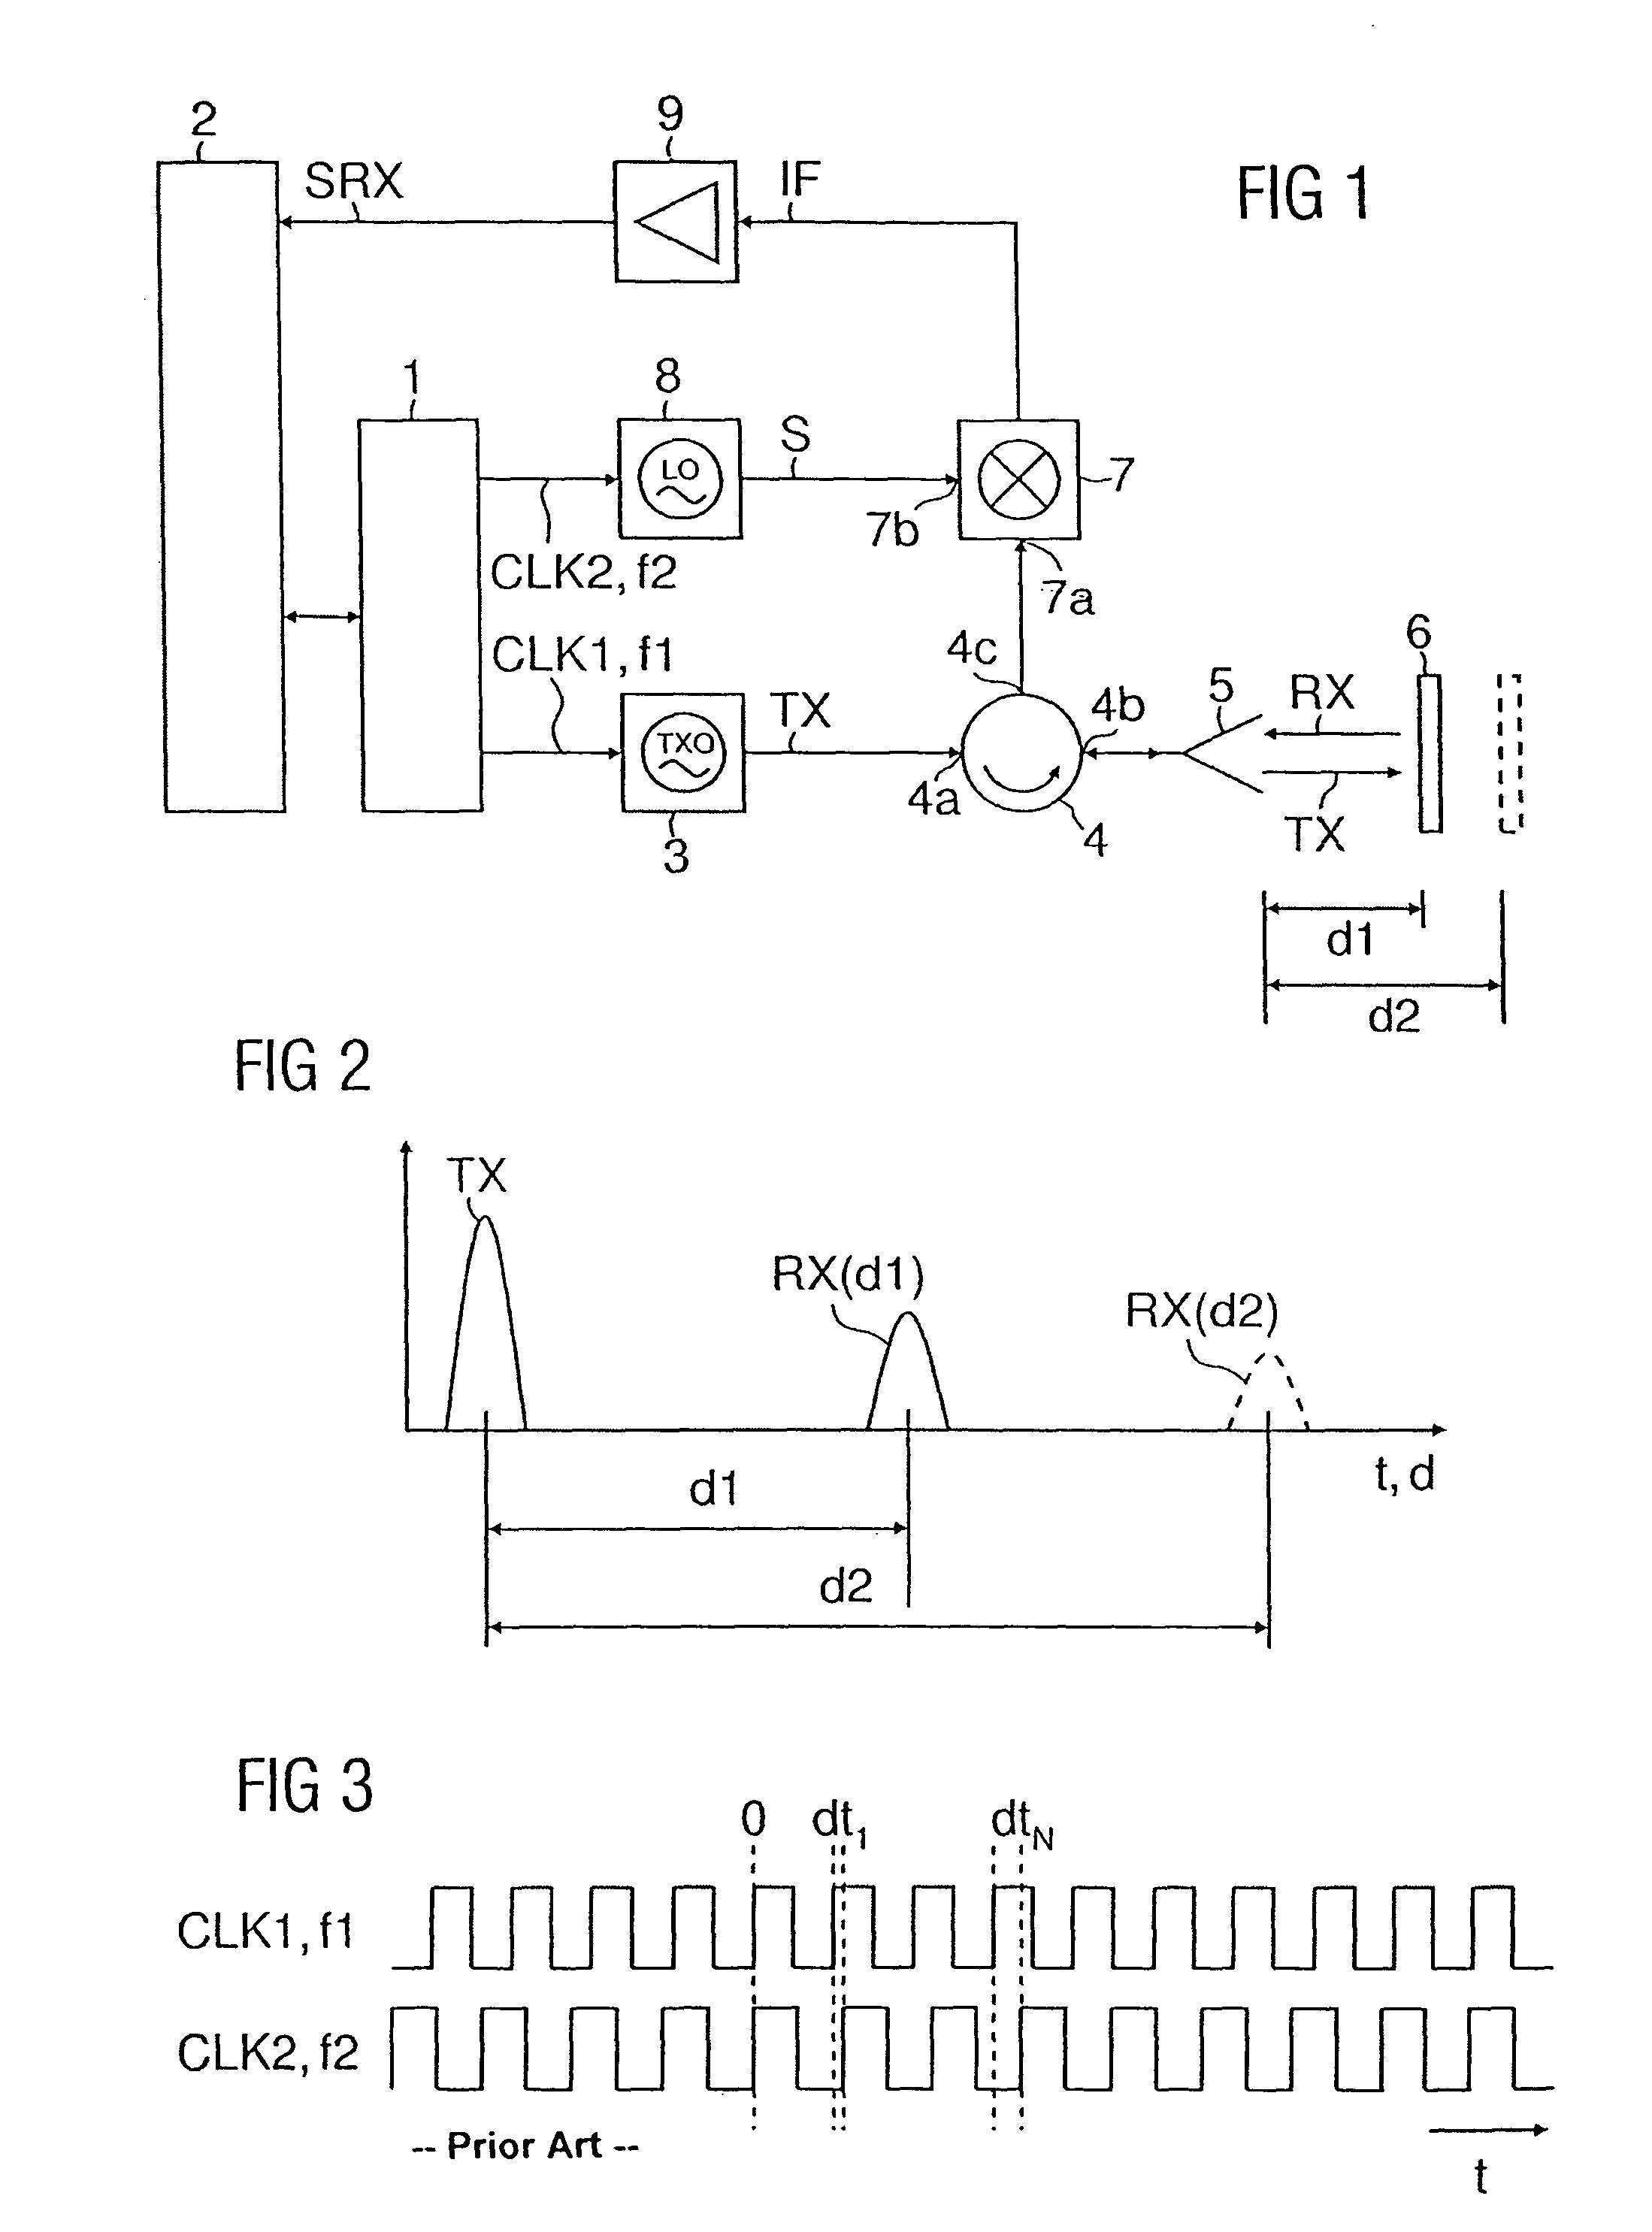 Digital time base generator and method for providing a first clock signal and a second clock signal